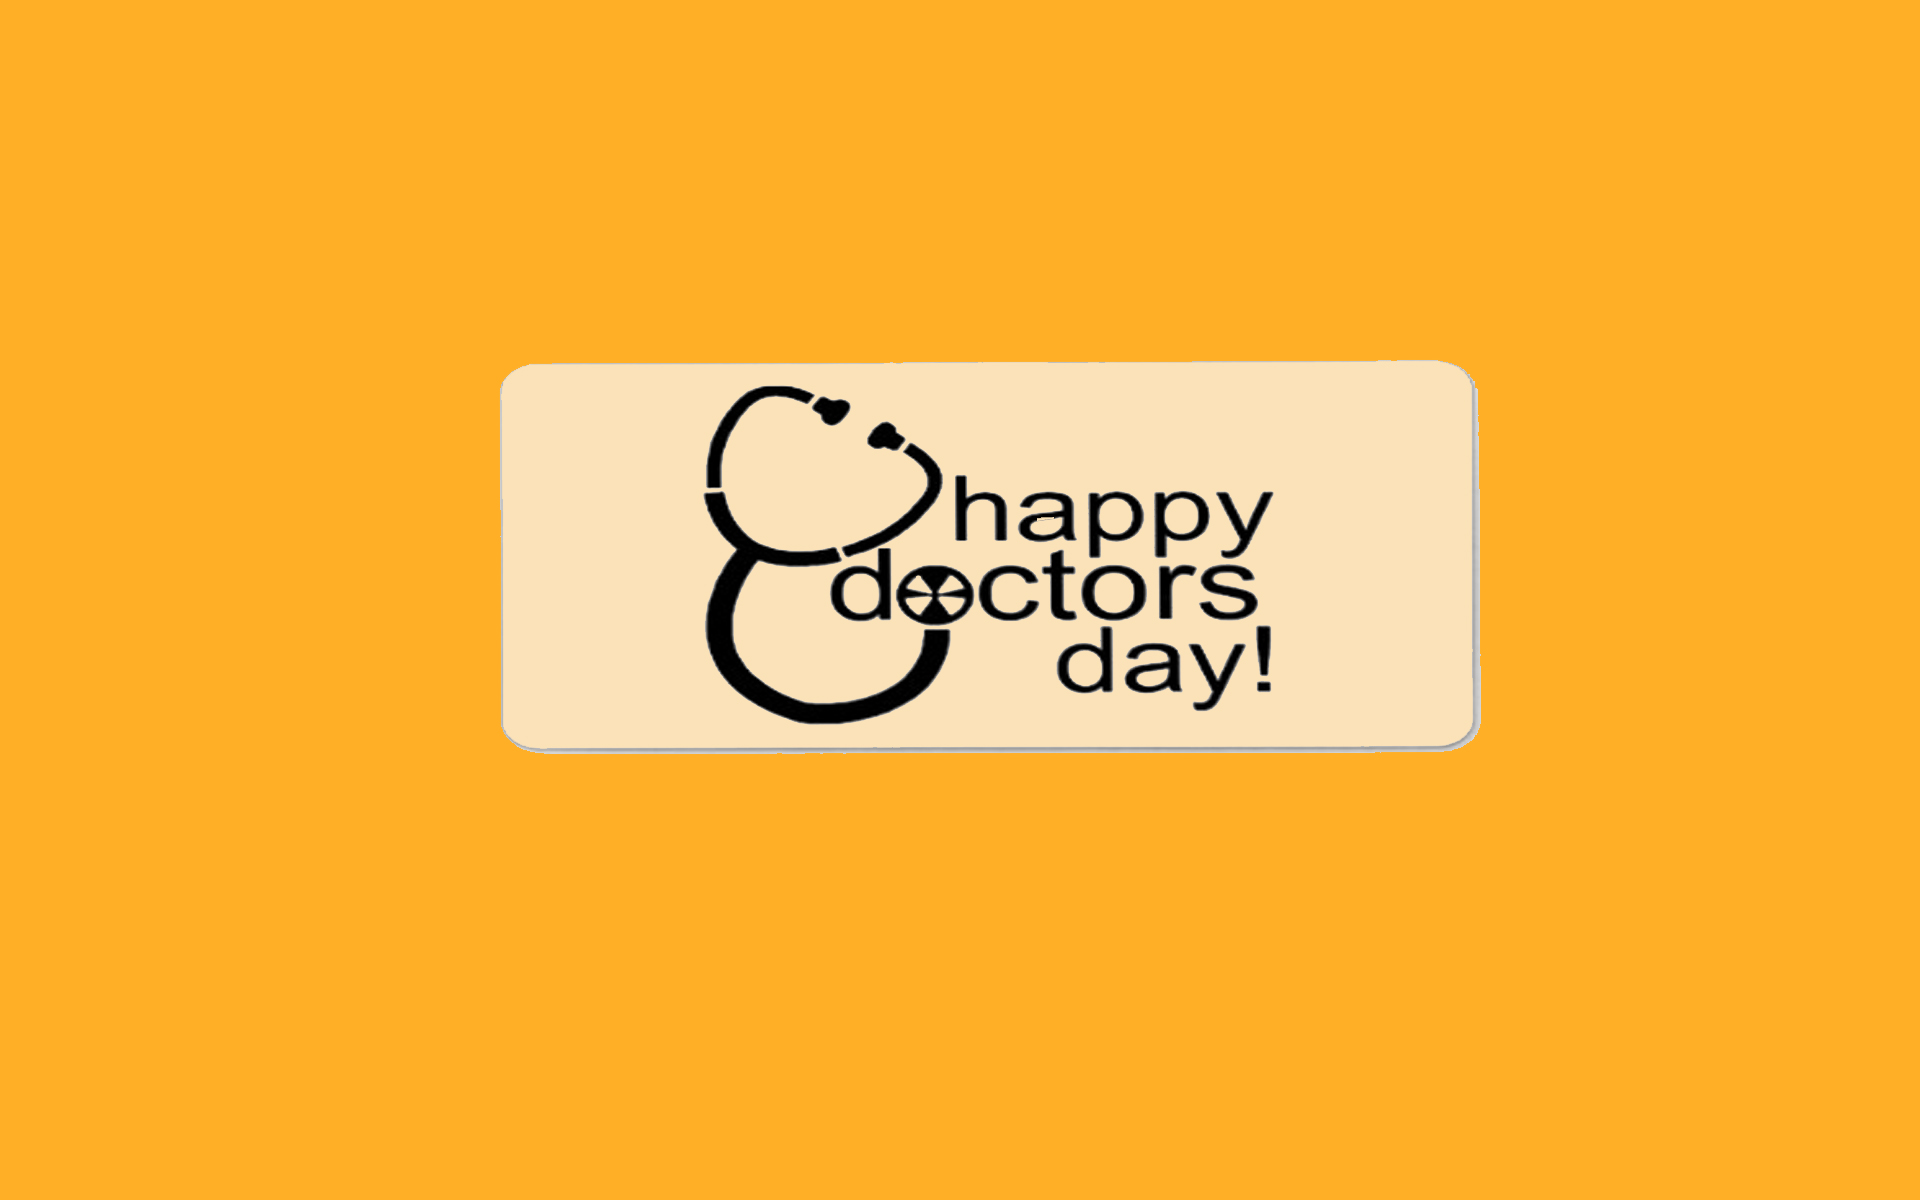 National Doctor's Day 2016 HD Wallpapers Cover pictures images banners